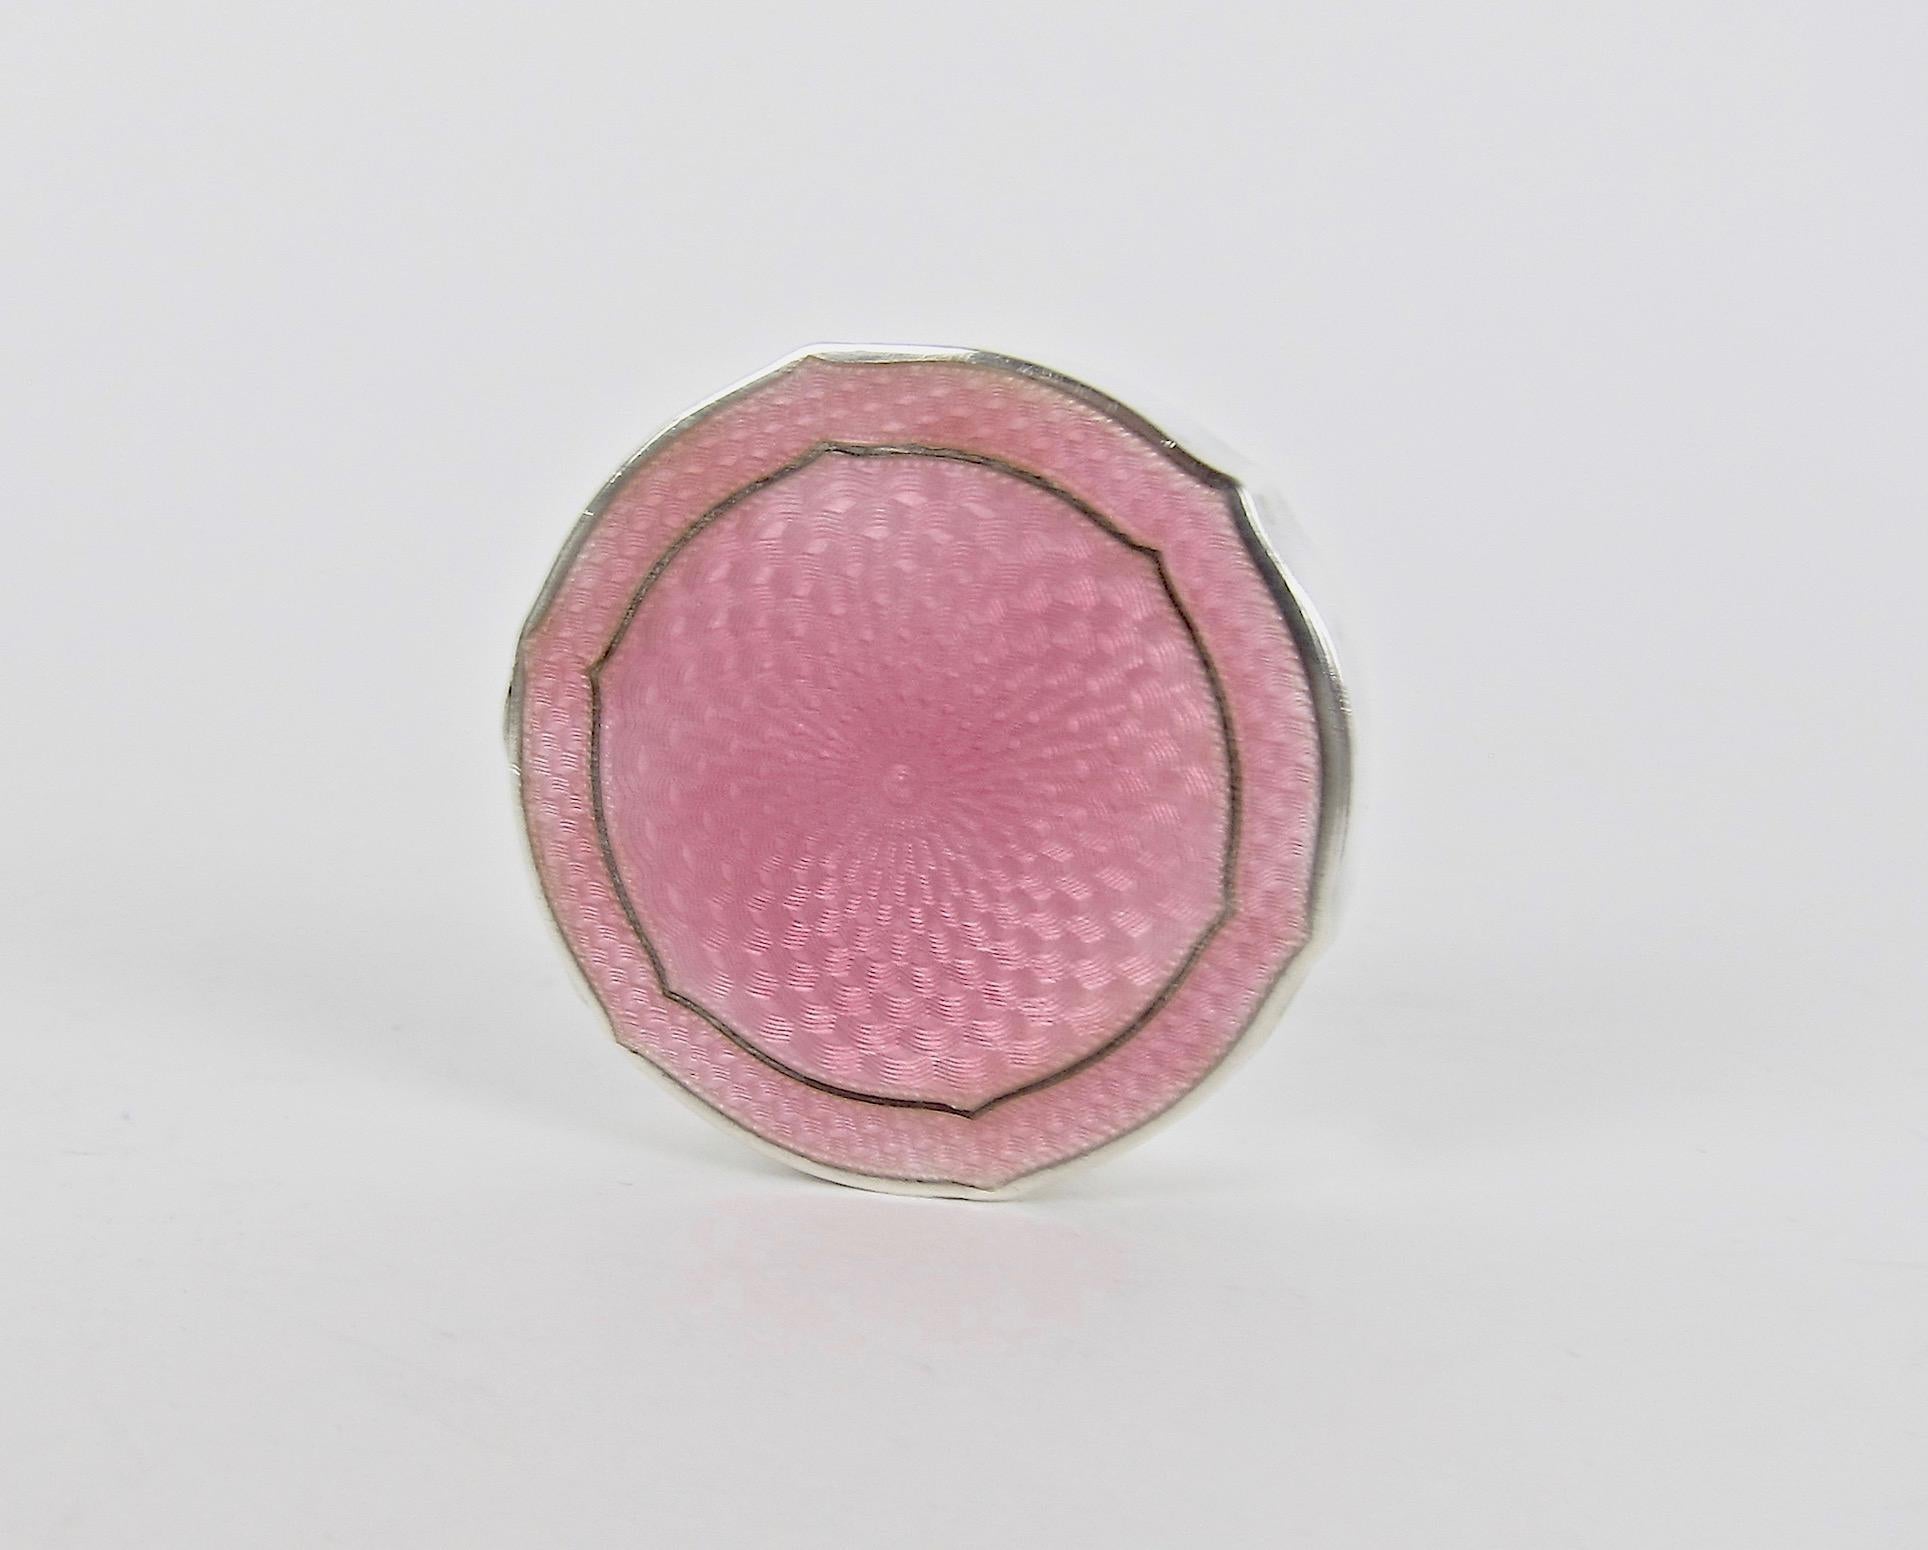 Unknown Antique Sterling Silver and Pink Guilloche Enamel Patch or Pill Box